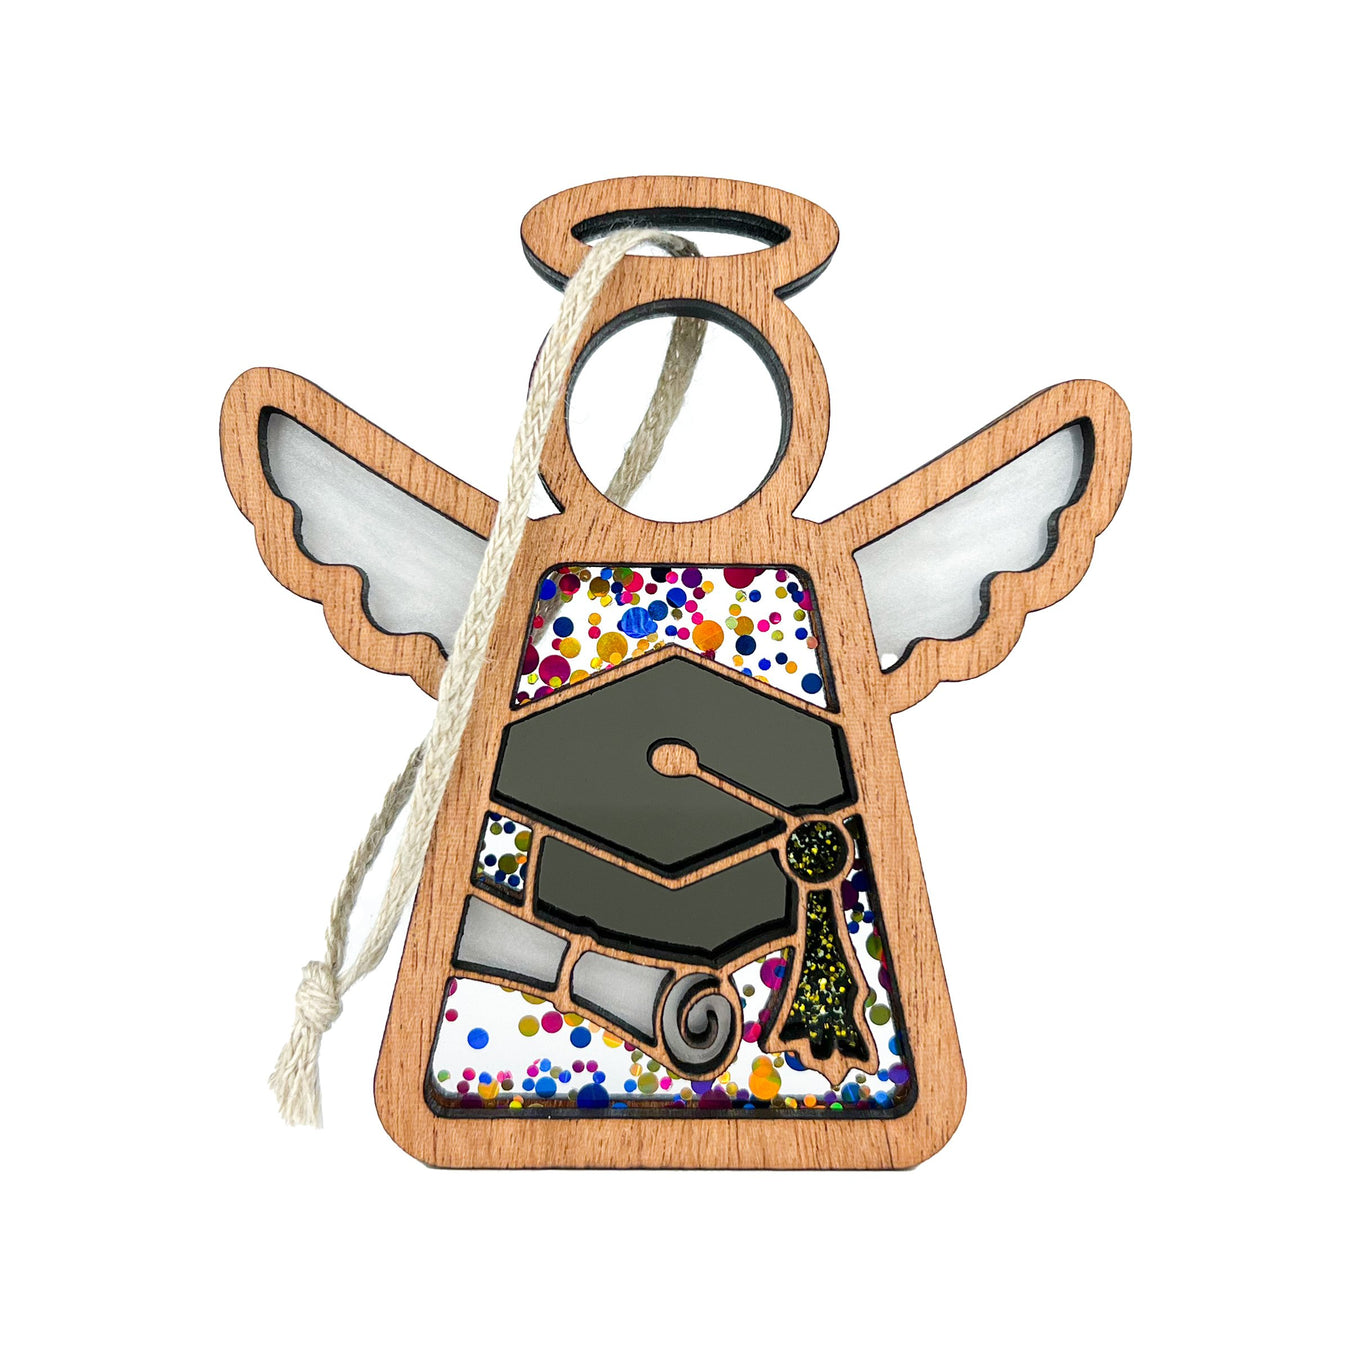 A Mother’s Angels® ornament styled as a graduation cap, perfect as a graduation gift or a graduation present for her, celebrating academic achievement.